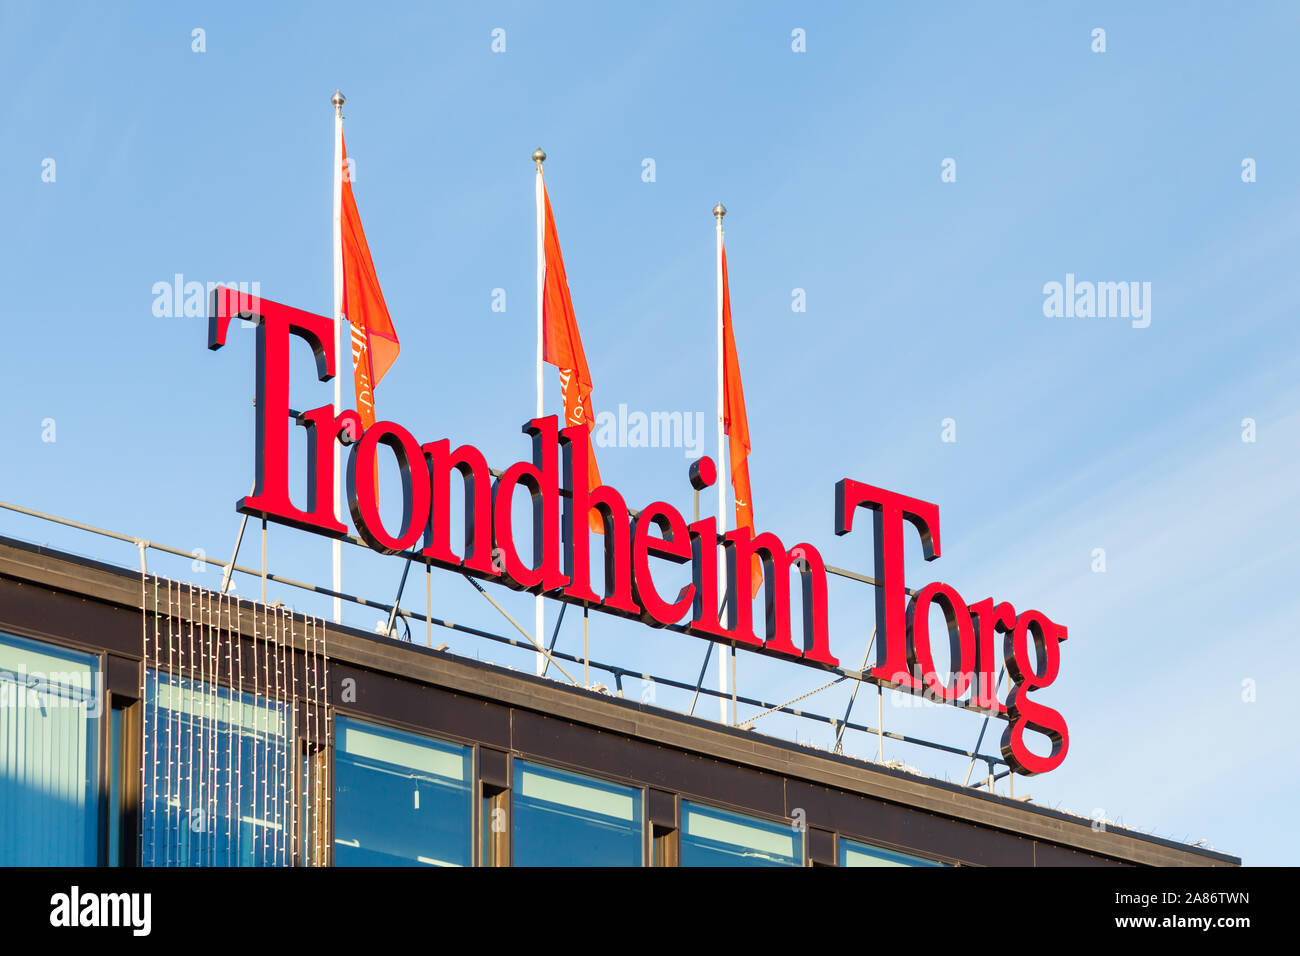 Trondheim Torg is the largest shopping centre in downtown Trondheim.  Trondheim is a city in Norway Stock Photo - Alamy